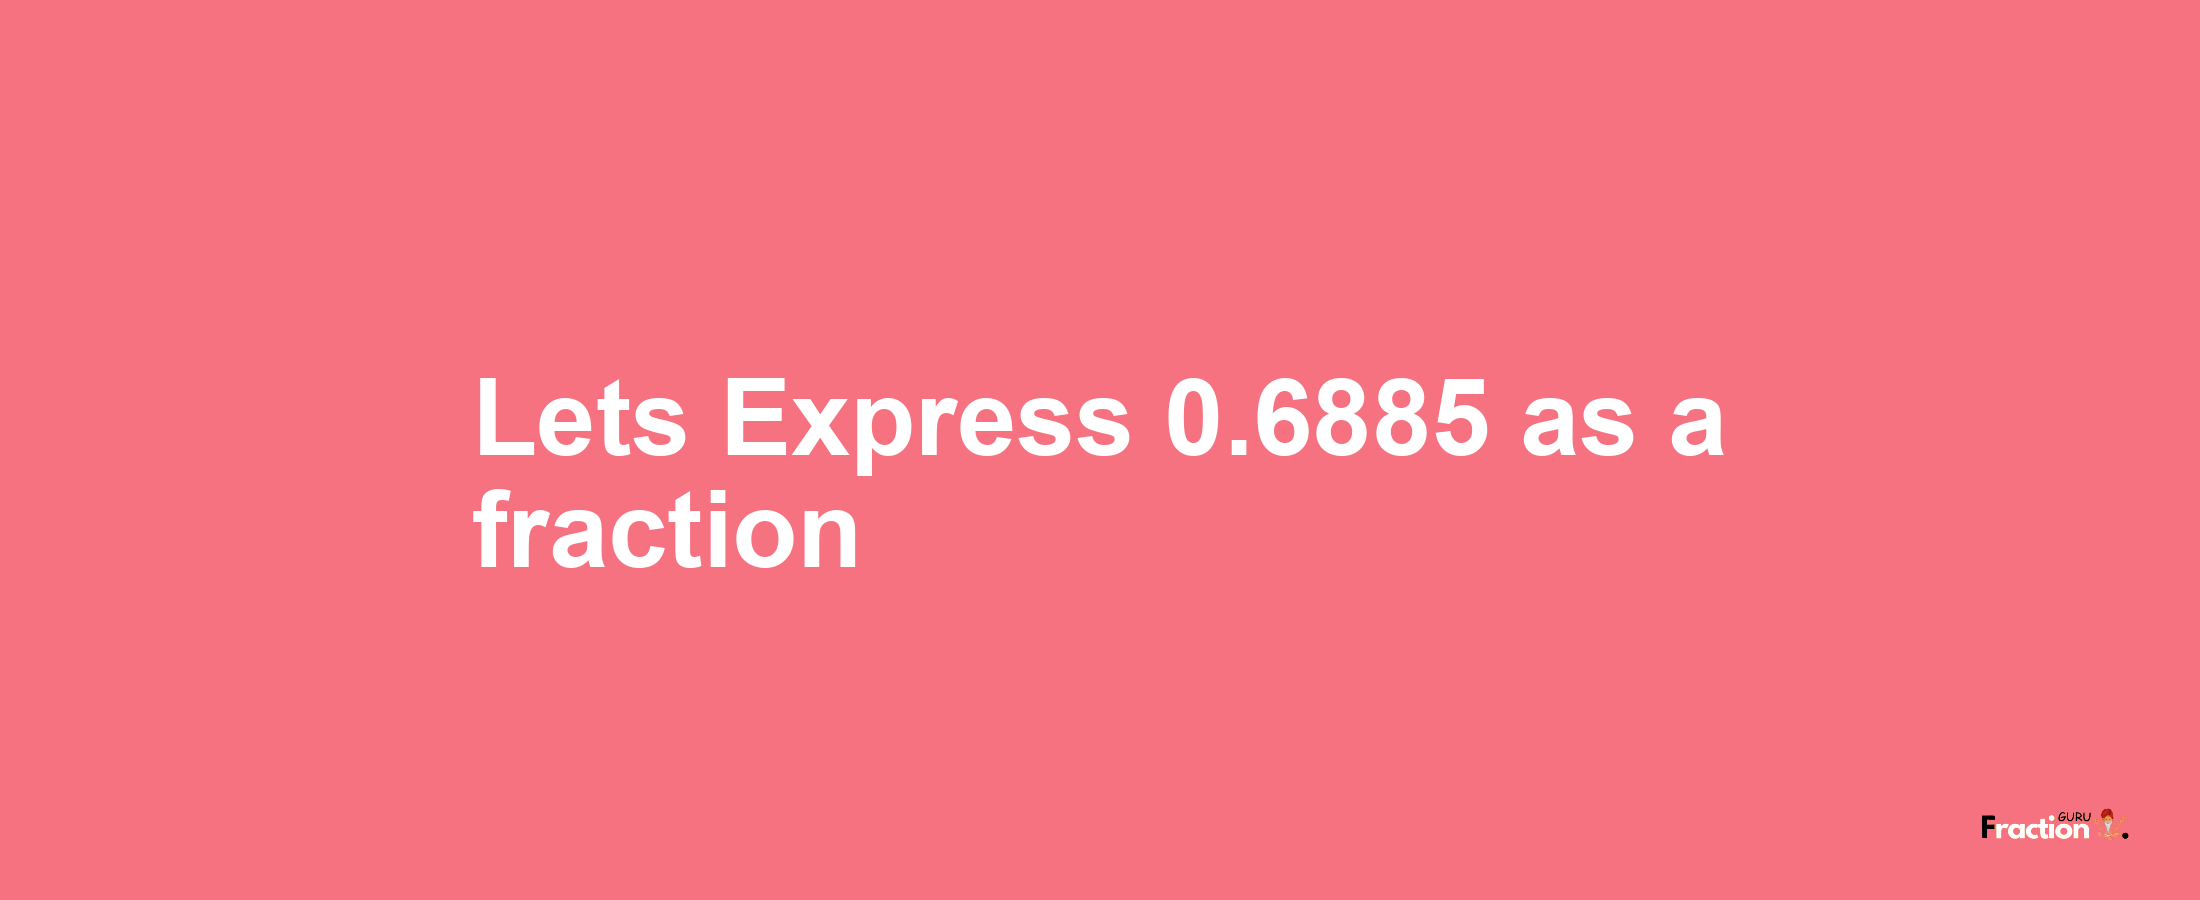 Lets Express 0.6885 as afraction